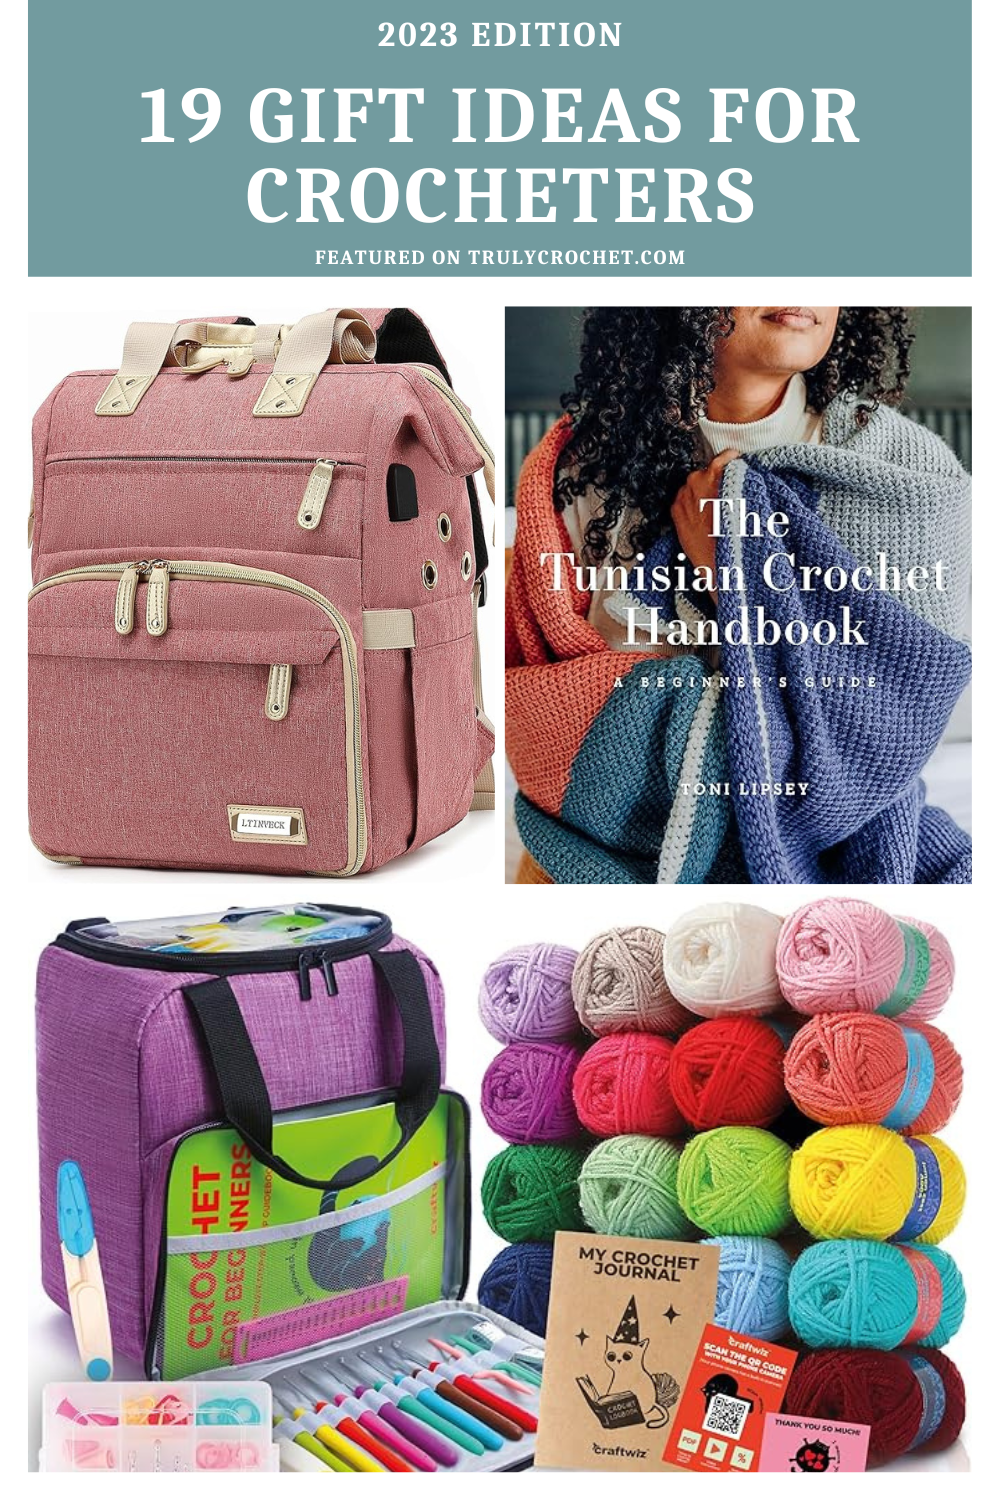 11 Gifts For Crocheters - Midwestern Moms